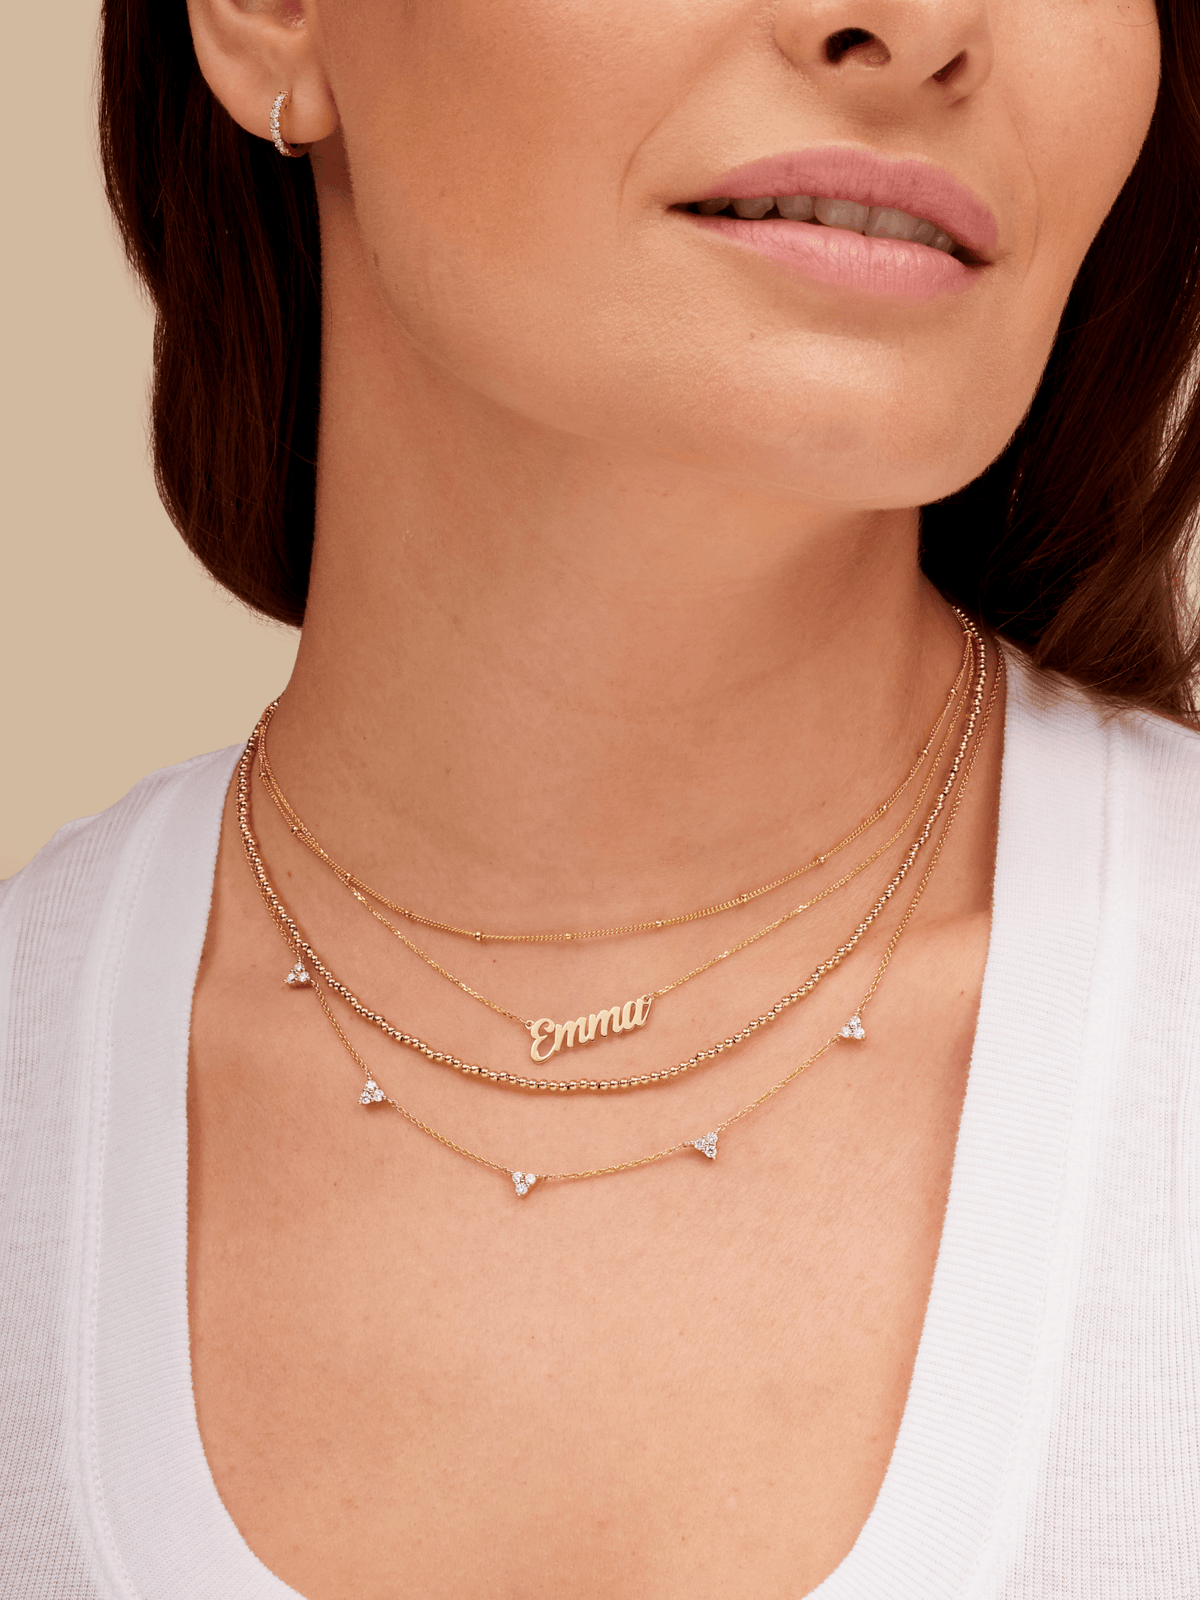 14K gold script name necklace layered with gold beaded necklace, trio triangle diamond necklace, and gold satellite chain